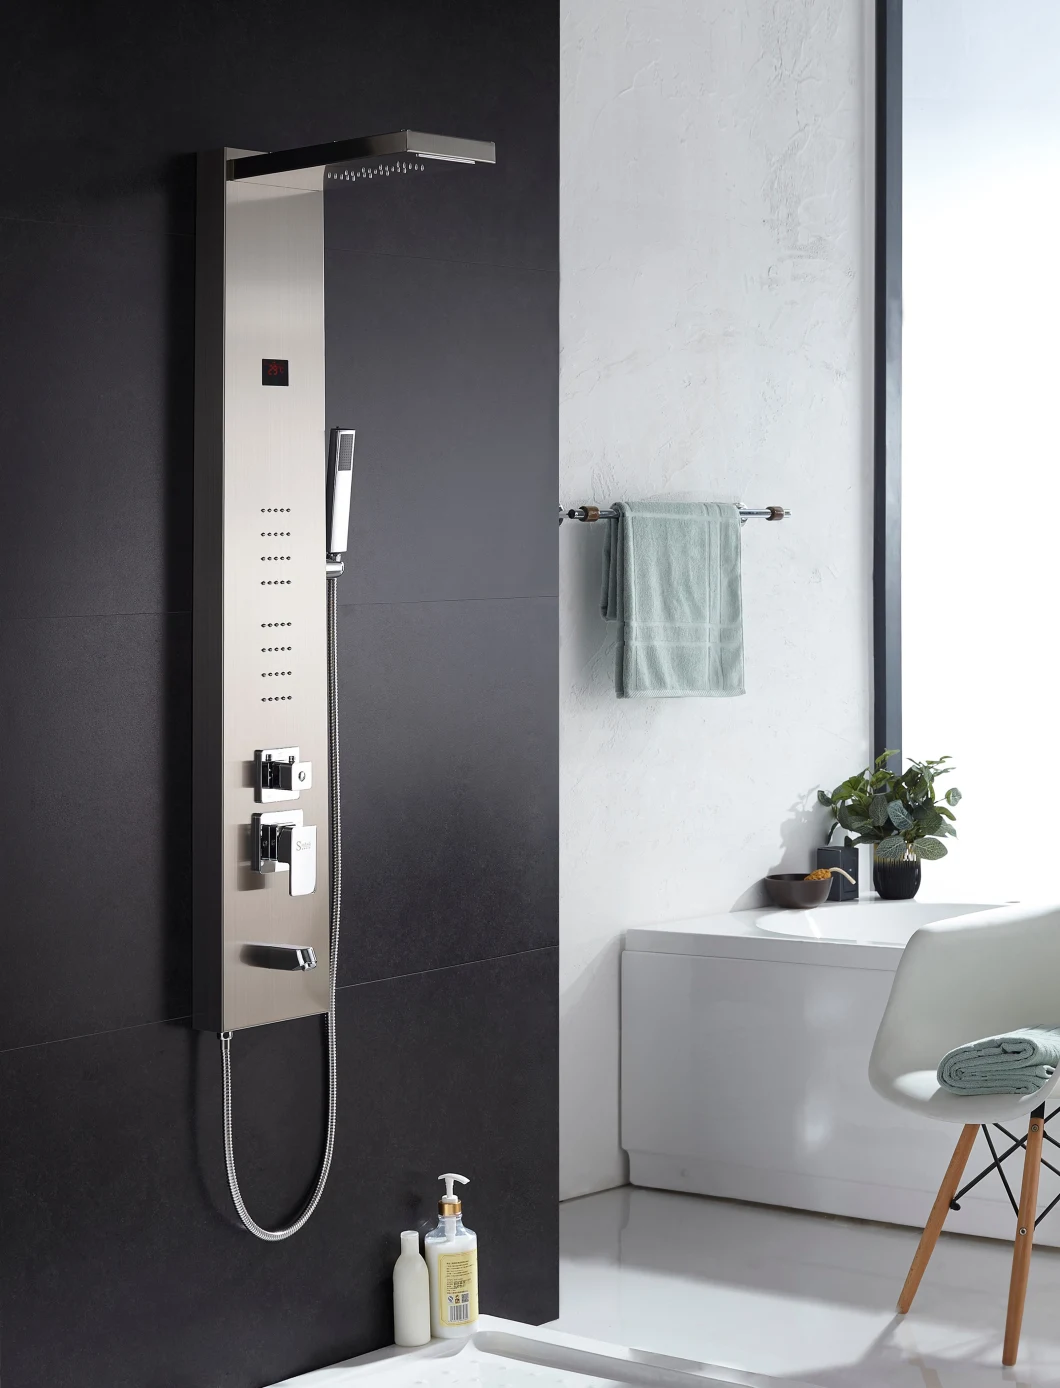 Woma 4 Function SS304 Shower Panel with Hand Shower in Chrome Mirror Finish (Y044)